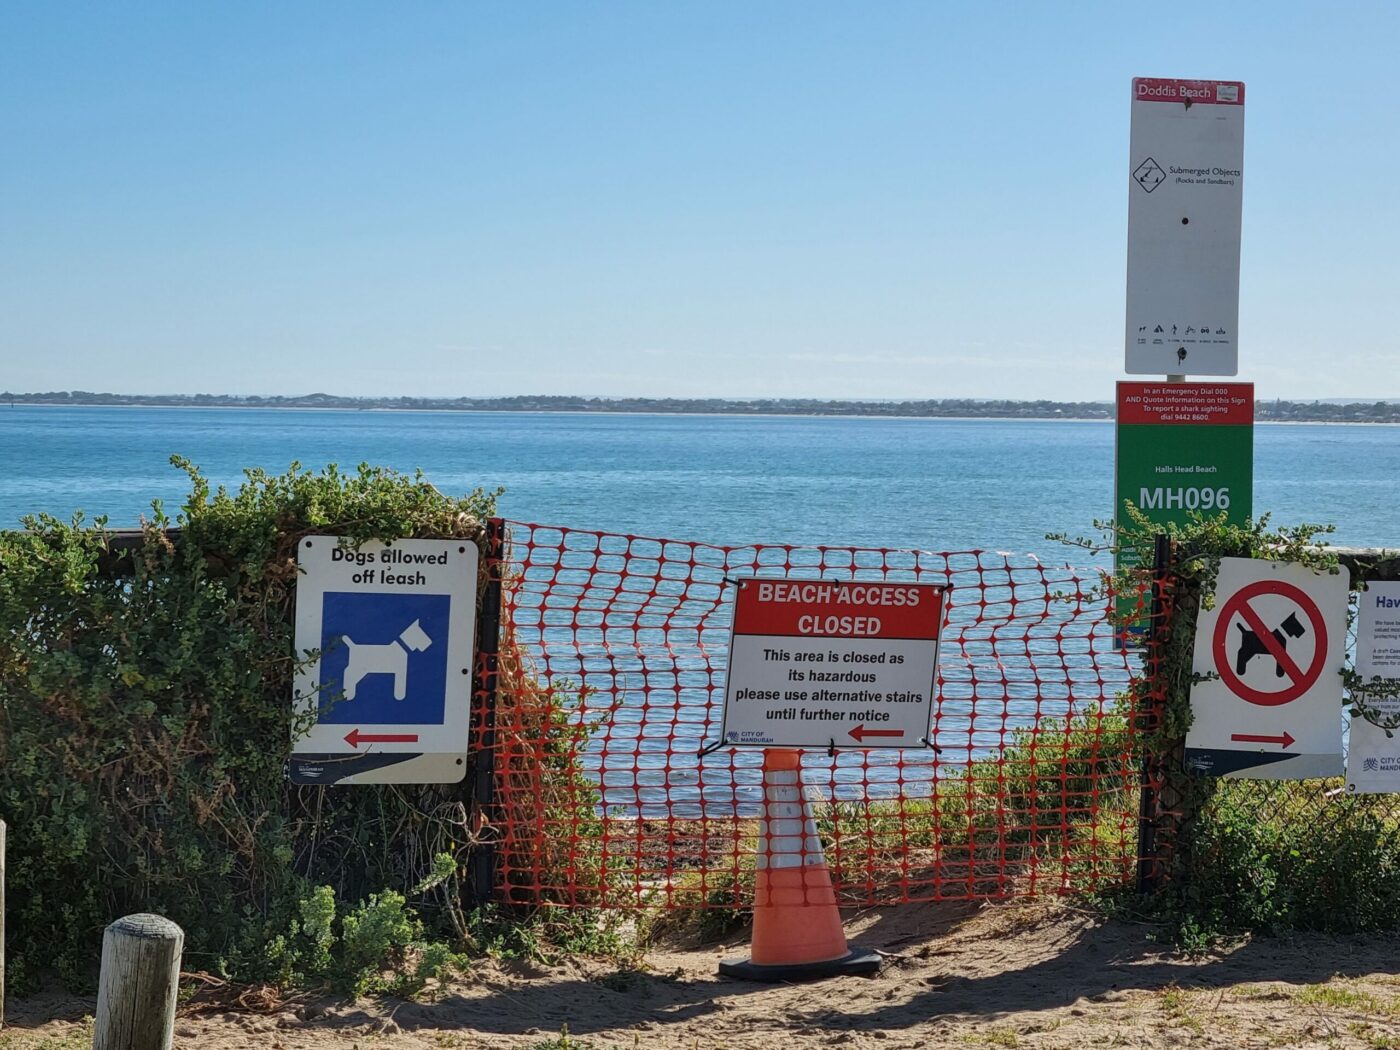 Robert Point Access Way #2 Closed due to Erosion from winter storms in 2022